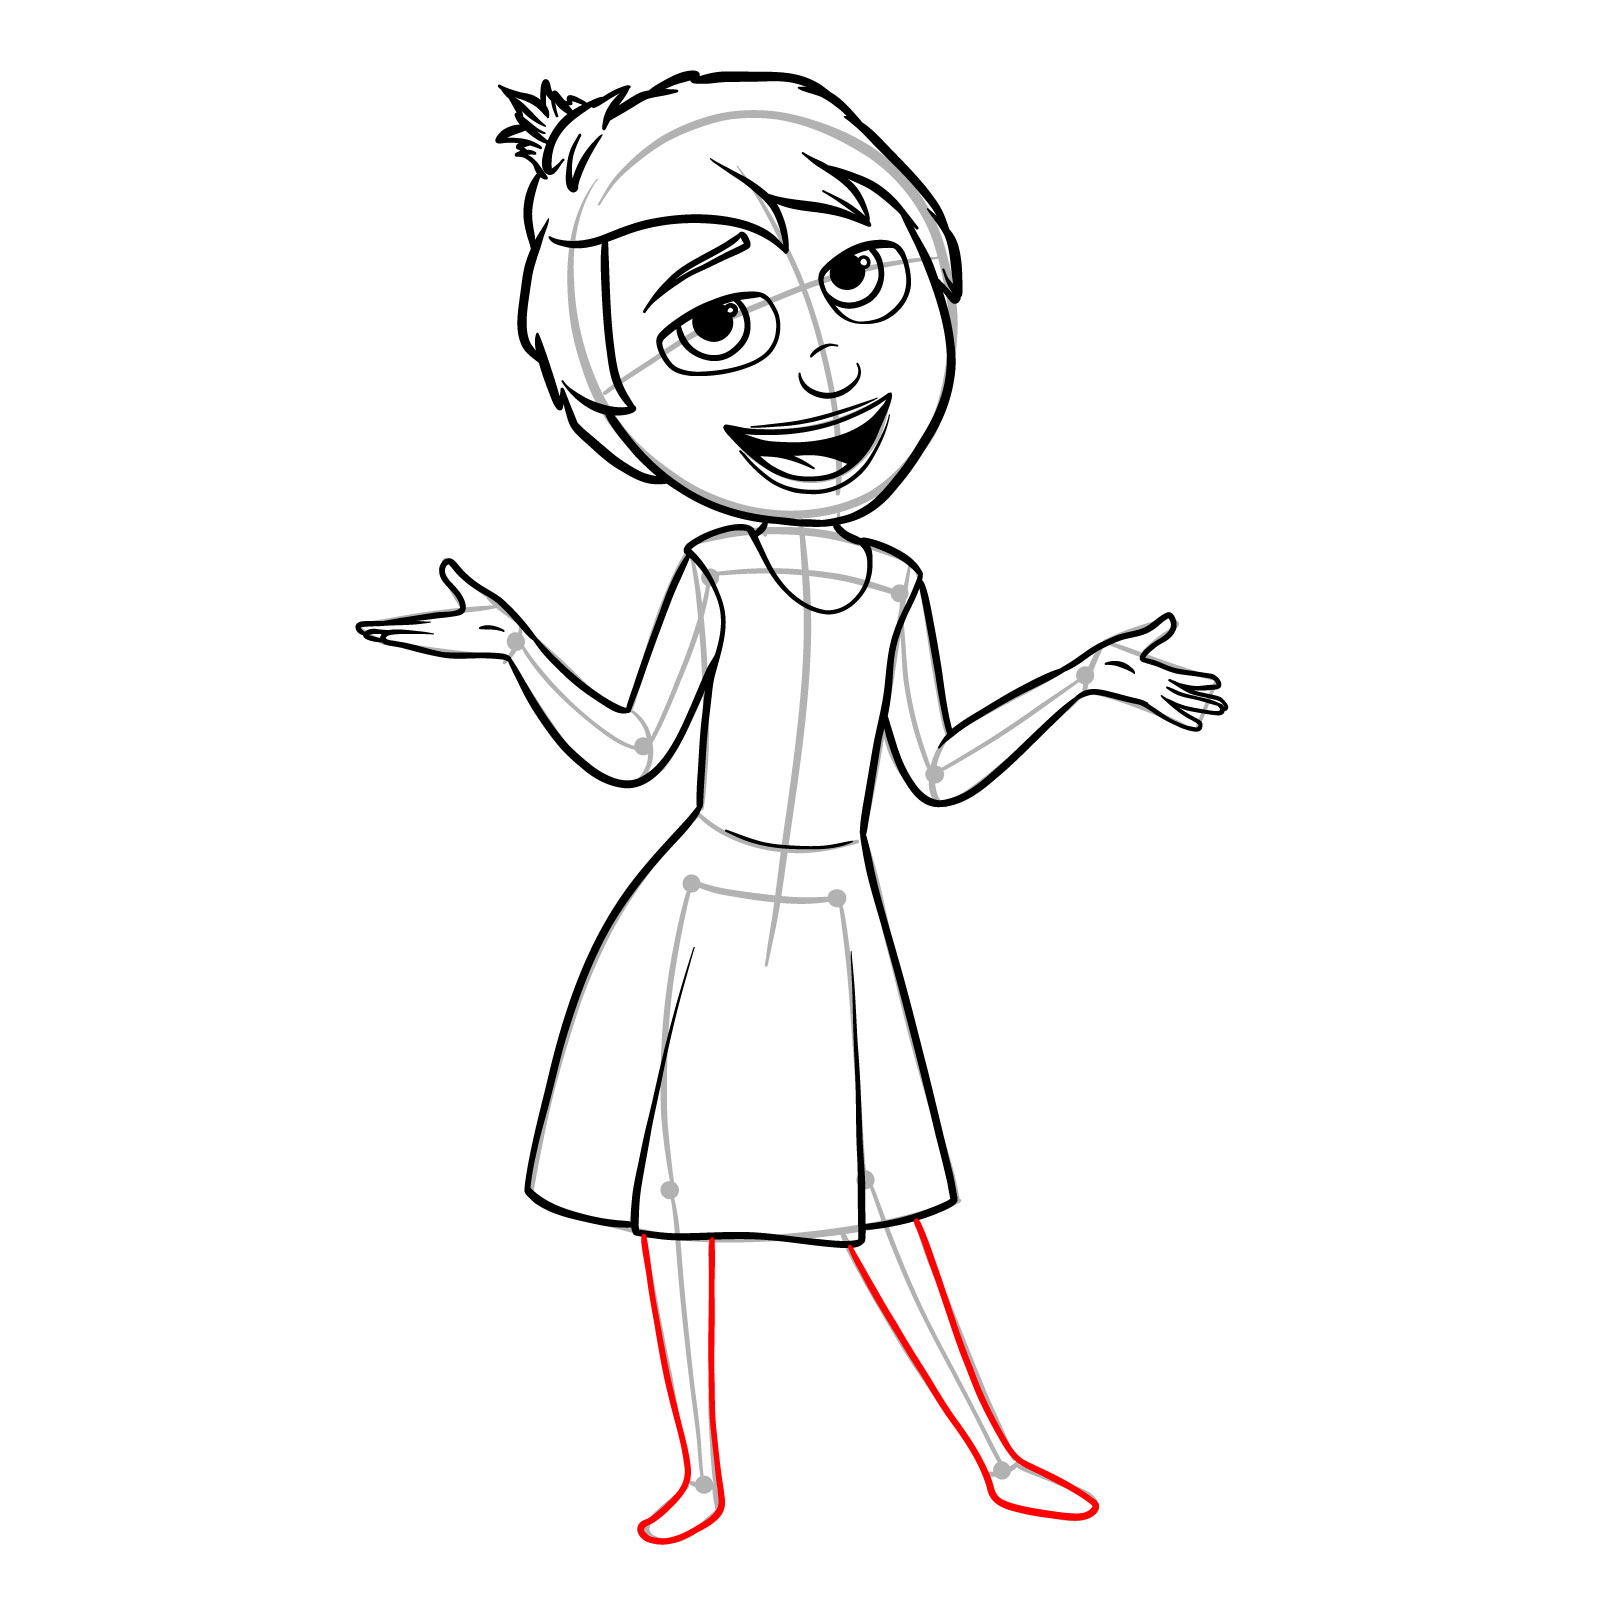 How to draw Joy from Inside Out 2 - step 12